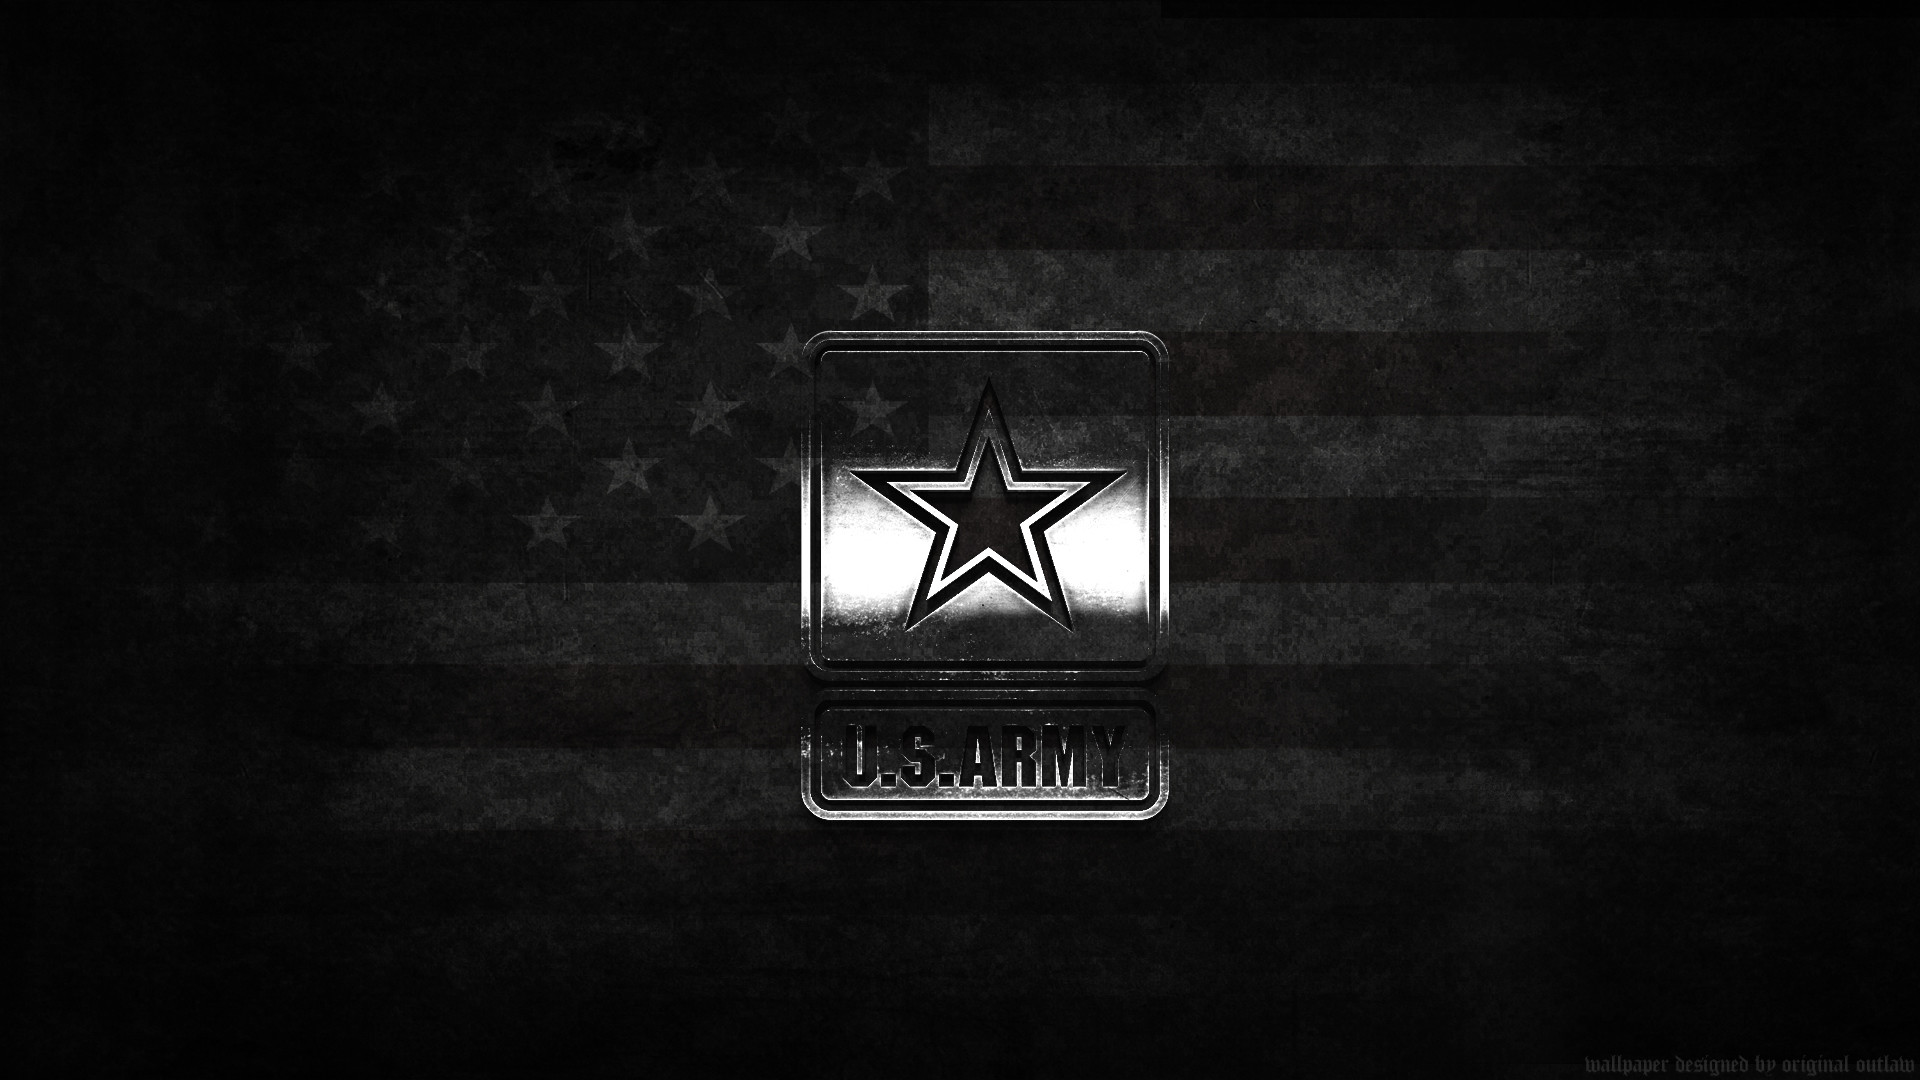 1920x1080 Download image Wallpapers Military Wallpaper United States Army Screen .